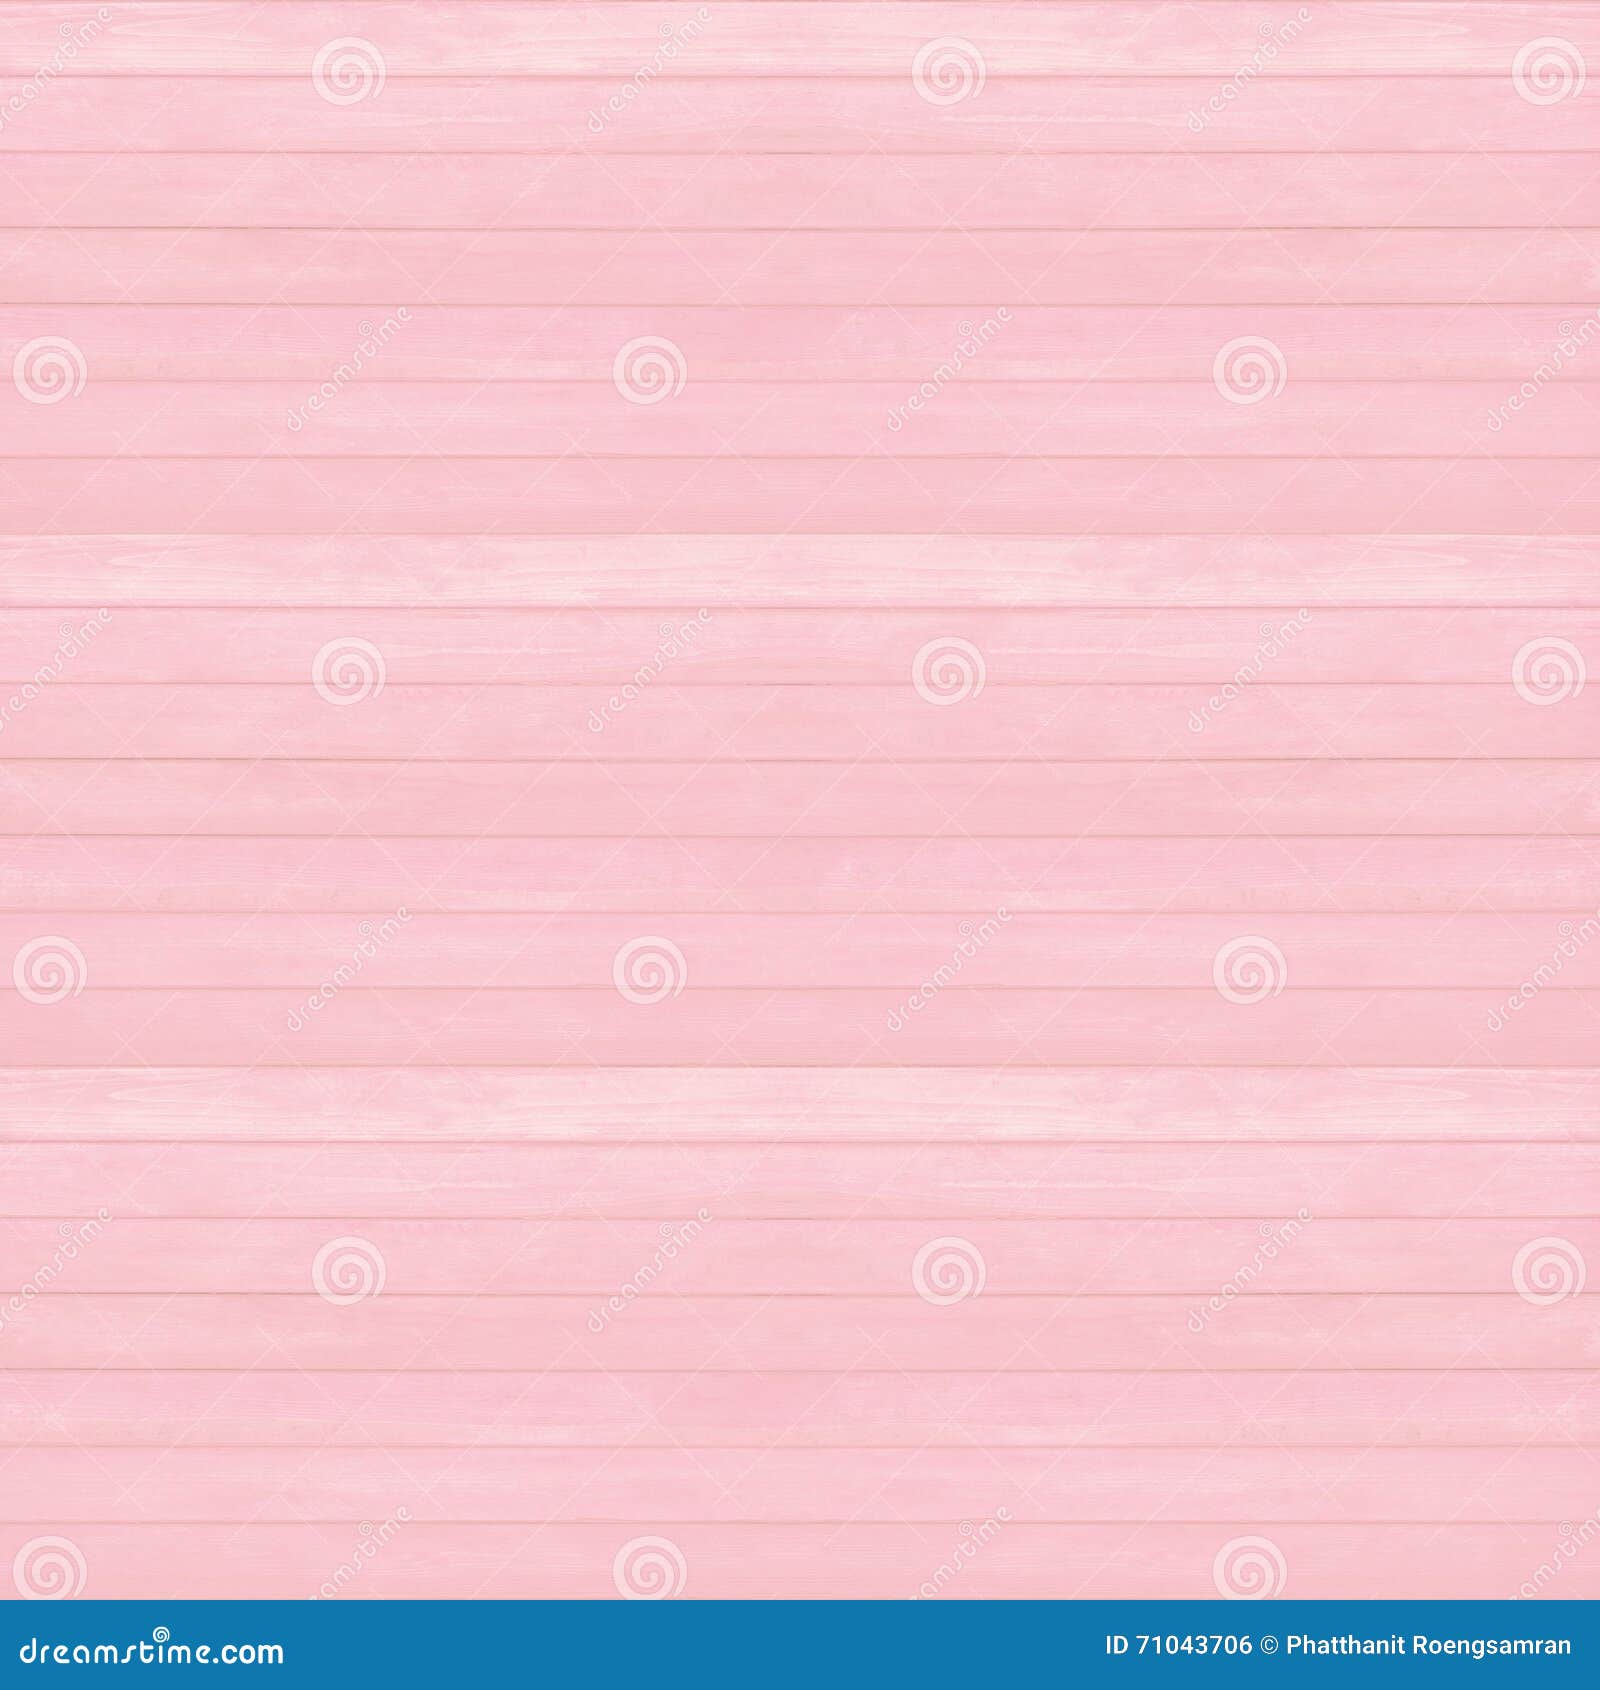 Wooden Wall Texture Background Pink Pantone Rosa Cuarzo Colour Stock Photo Image Of Panel Color 71043706